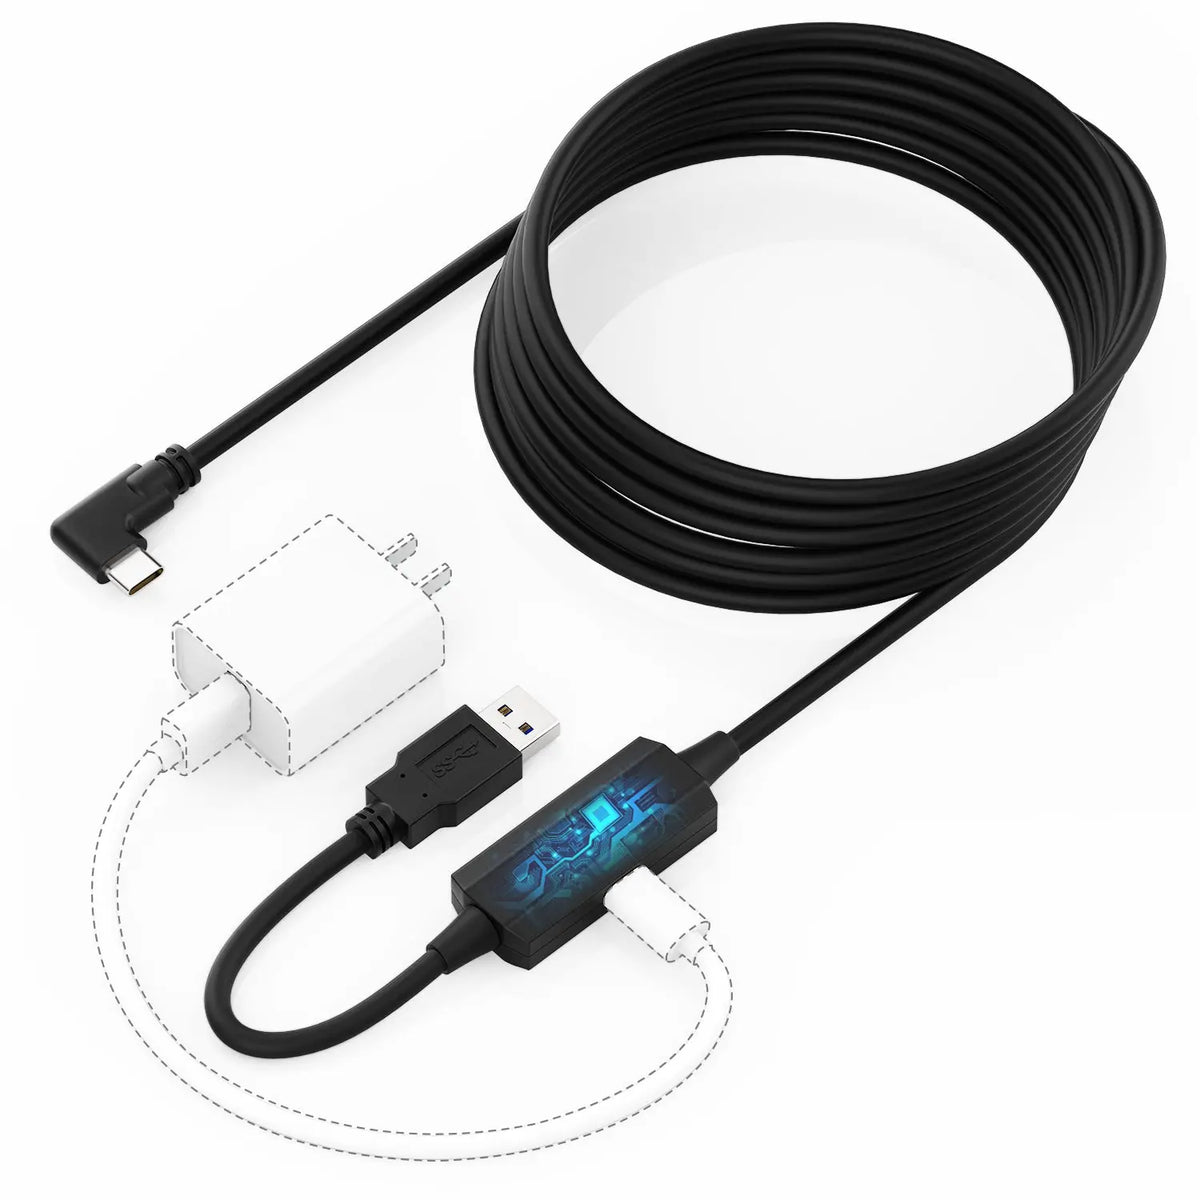 AMVR for Meta Quest 2 Link Cable 20FT and VR Cable Management 3 Packs for  Meta Quest 2/1 and PC VR, High Speed PC Data Transfer USB 3.0 to Type C  Cable